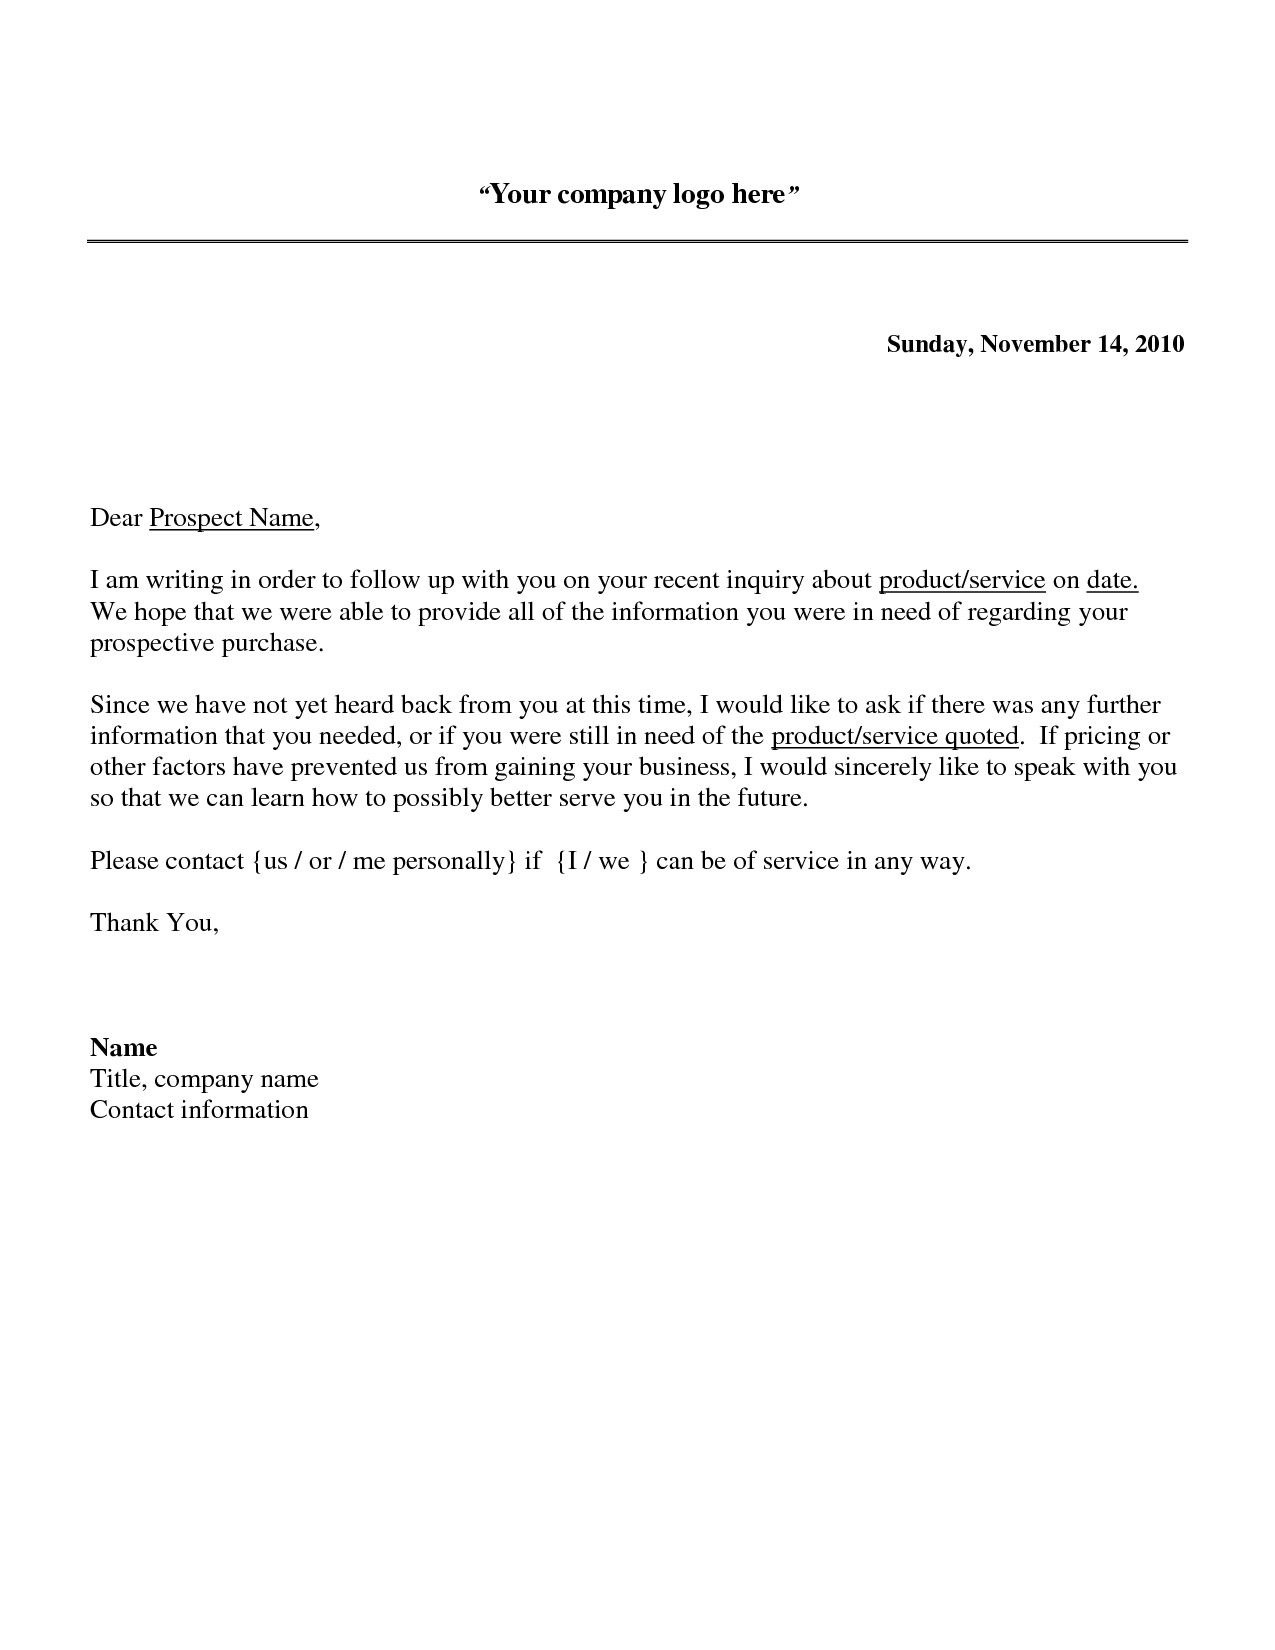 Samples Of Cover Letter  Manager Cover Letter Template Samples Letter Cover Templates